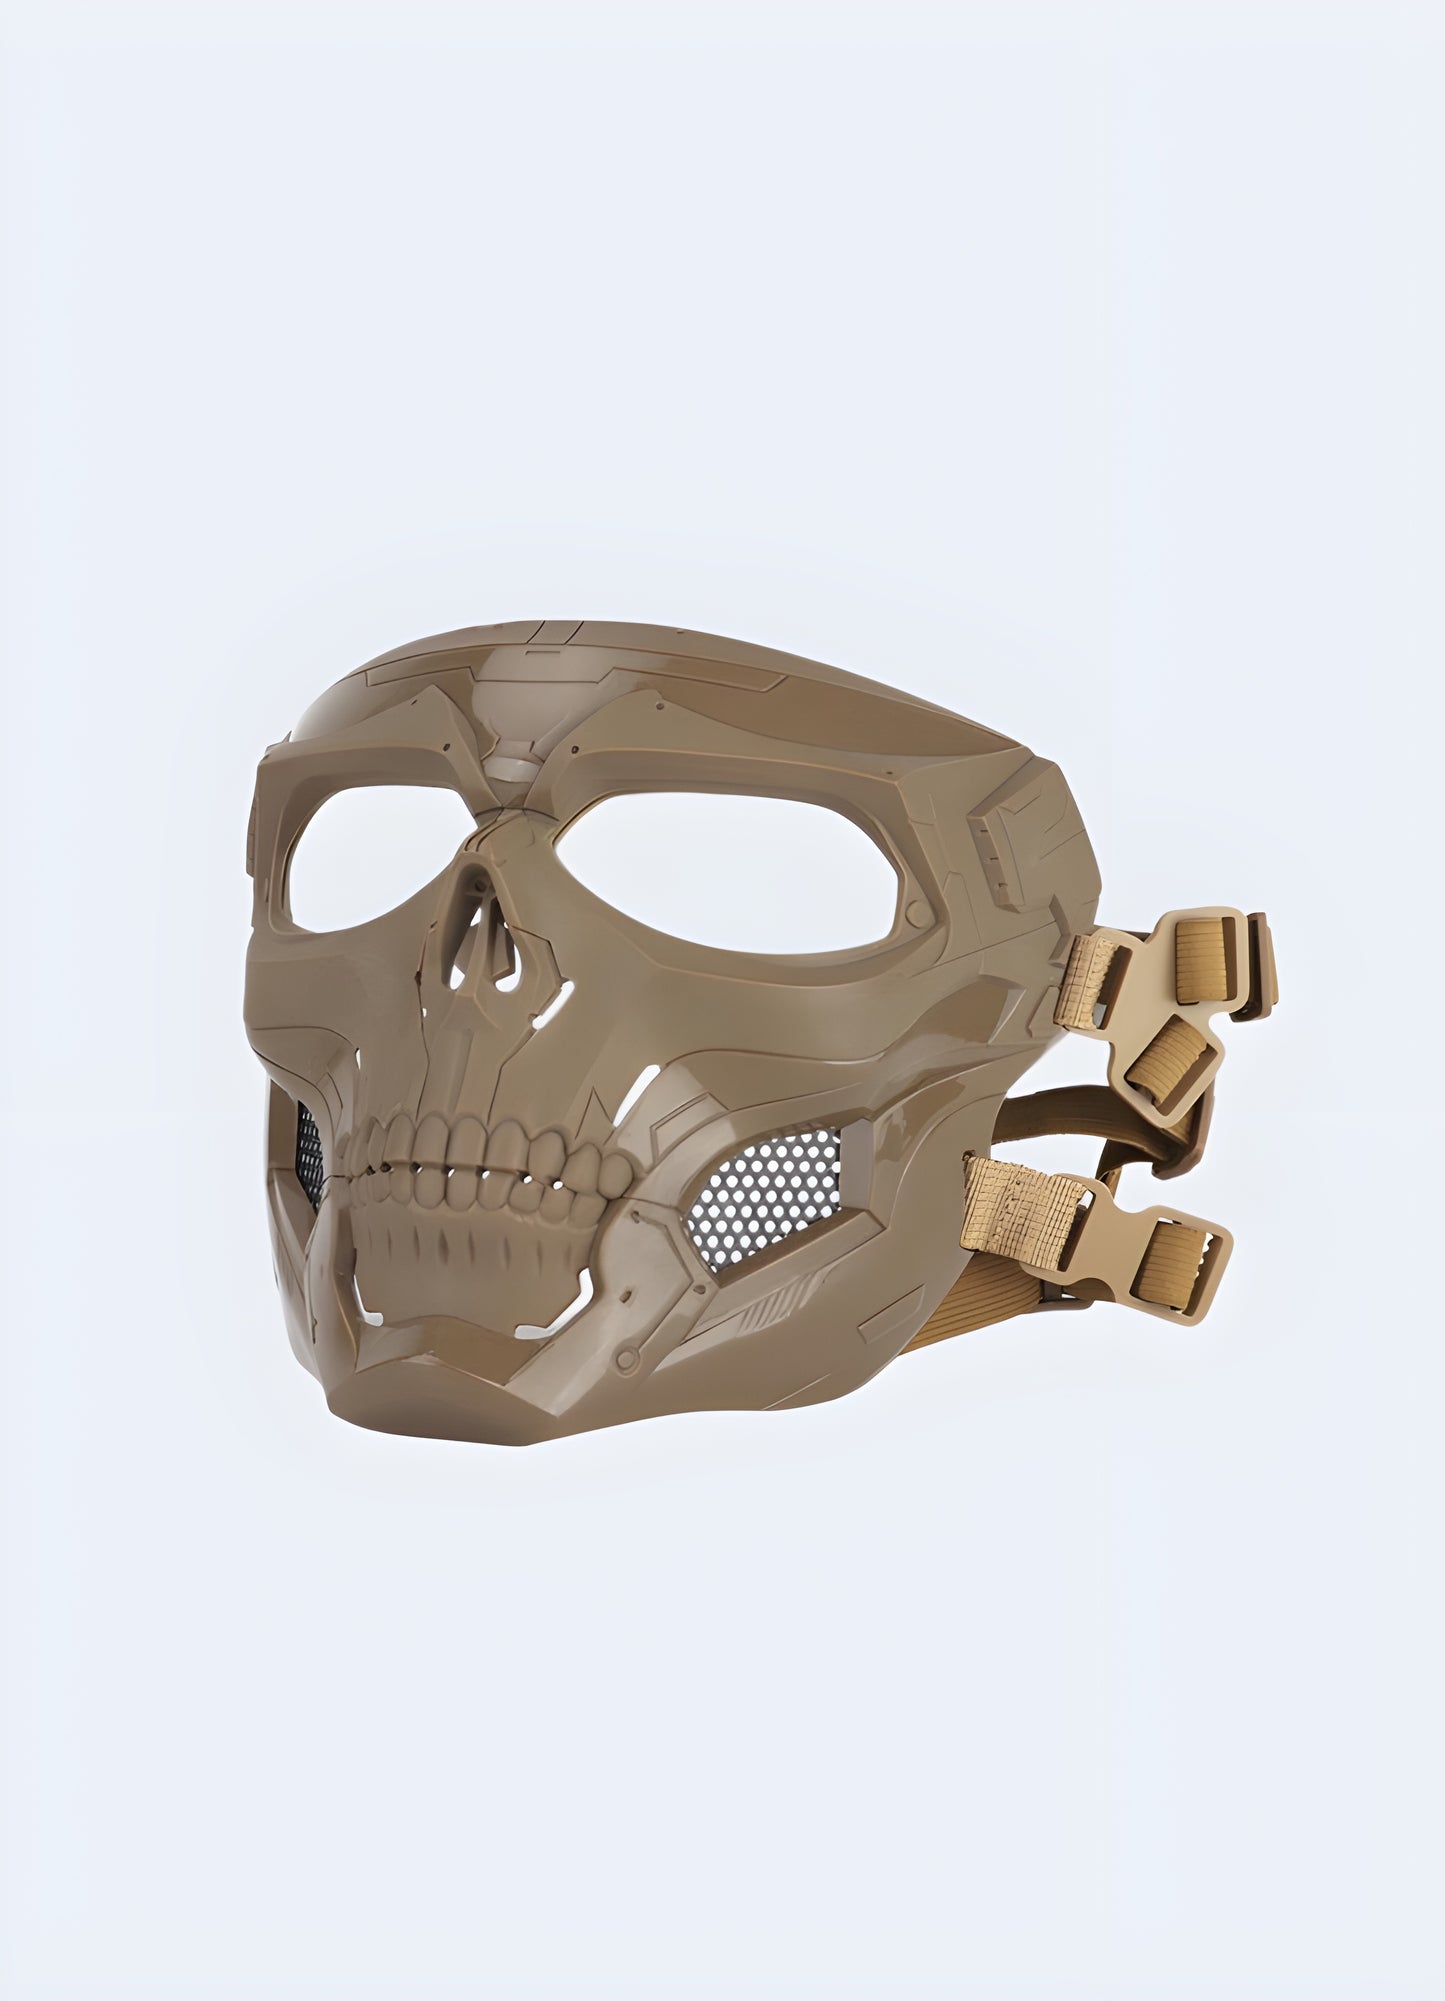 Forged from dense EVA foam, this mask provides an extra layer of defense without sacrificing its intimidating skull aesthetic